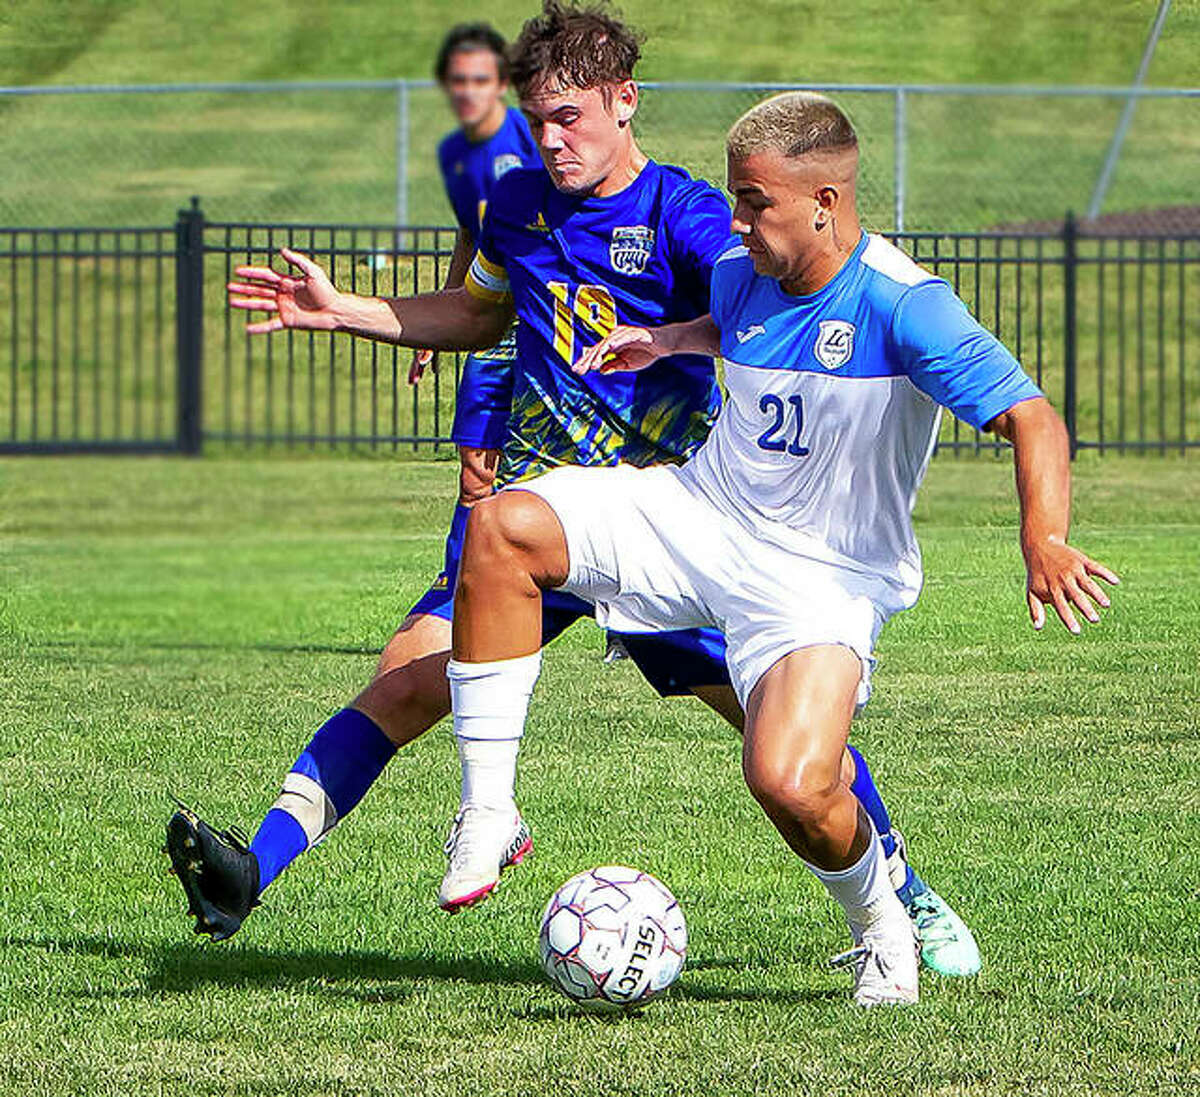 LCCC’s Eduardo Rodriguez (21) scored a pair of first-half goals and helped the Trailblazers to a 4-1 win at Kankakee College Sunday. The 13th-ranked LCCC men are 10-3 on the season.